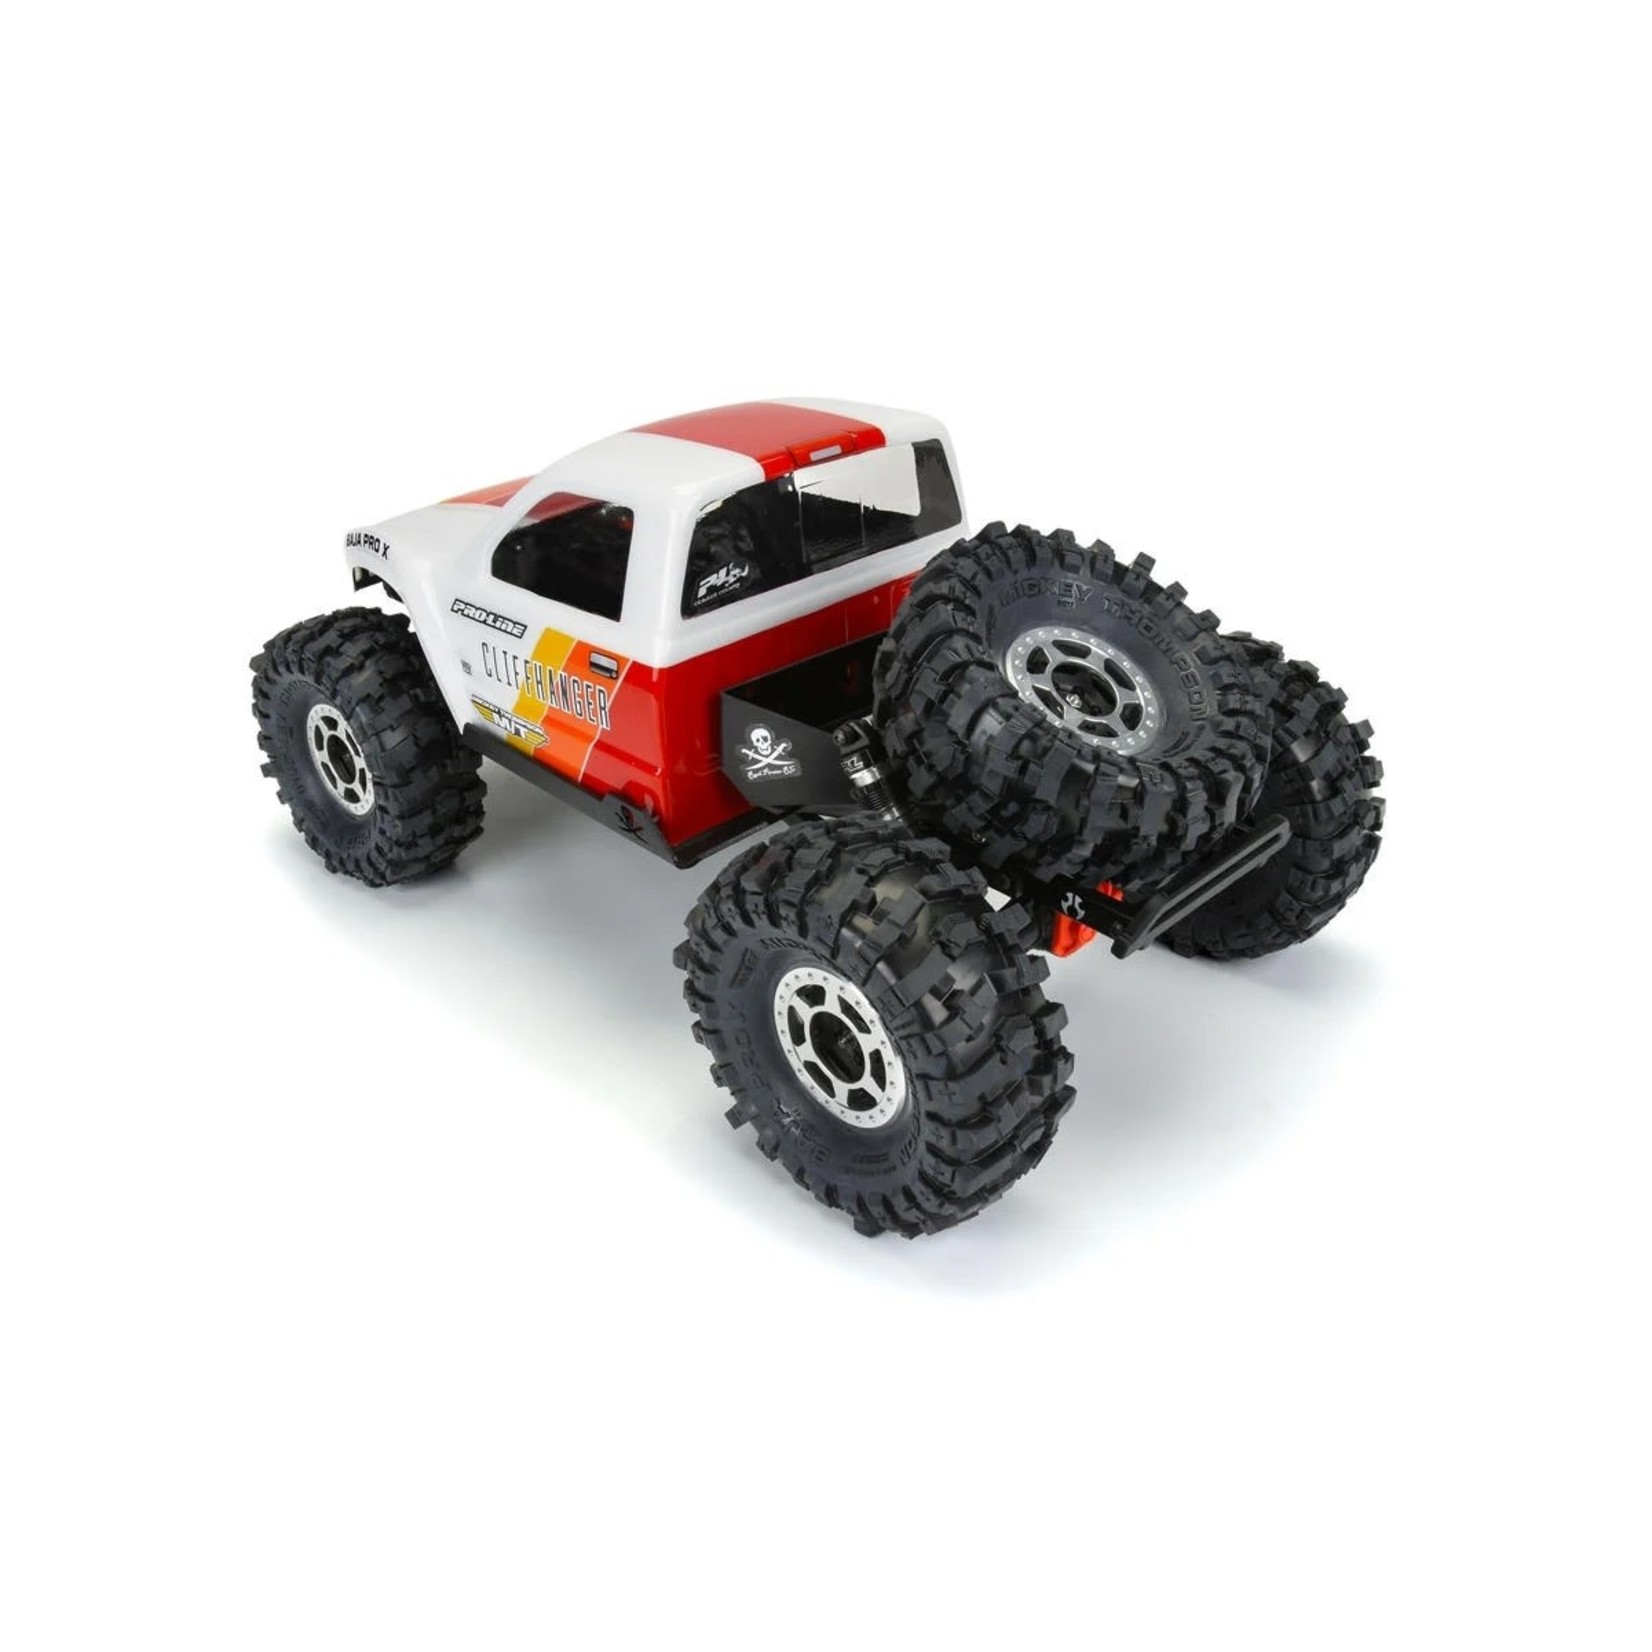 Pro-Line Pro-Line Cliffhanger HP 1/10 Cab Only 12.3" Comp Crawler Body (Clear) #3615-00